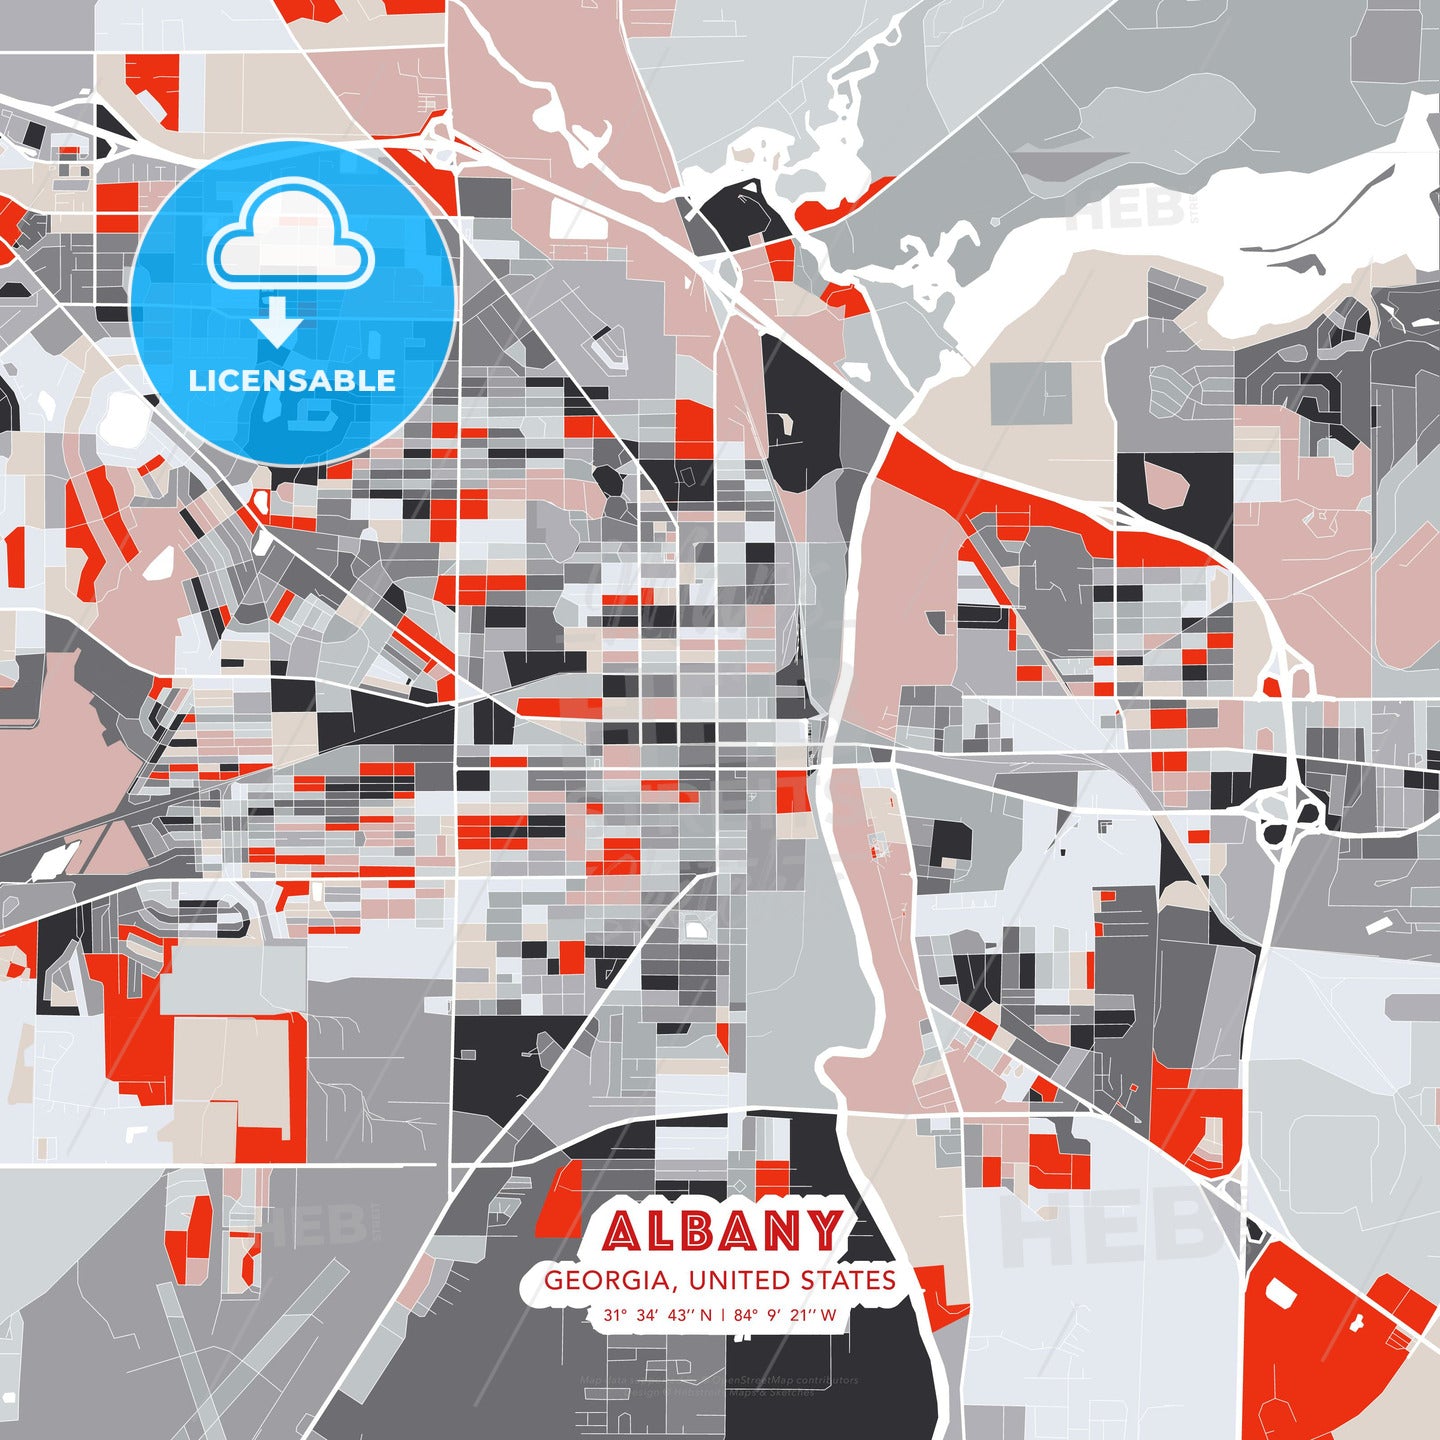 Albany, Georgia, United States, modern map - HEBSTREITS Sketches